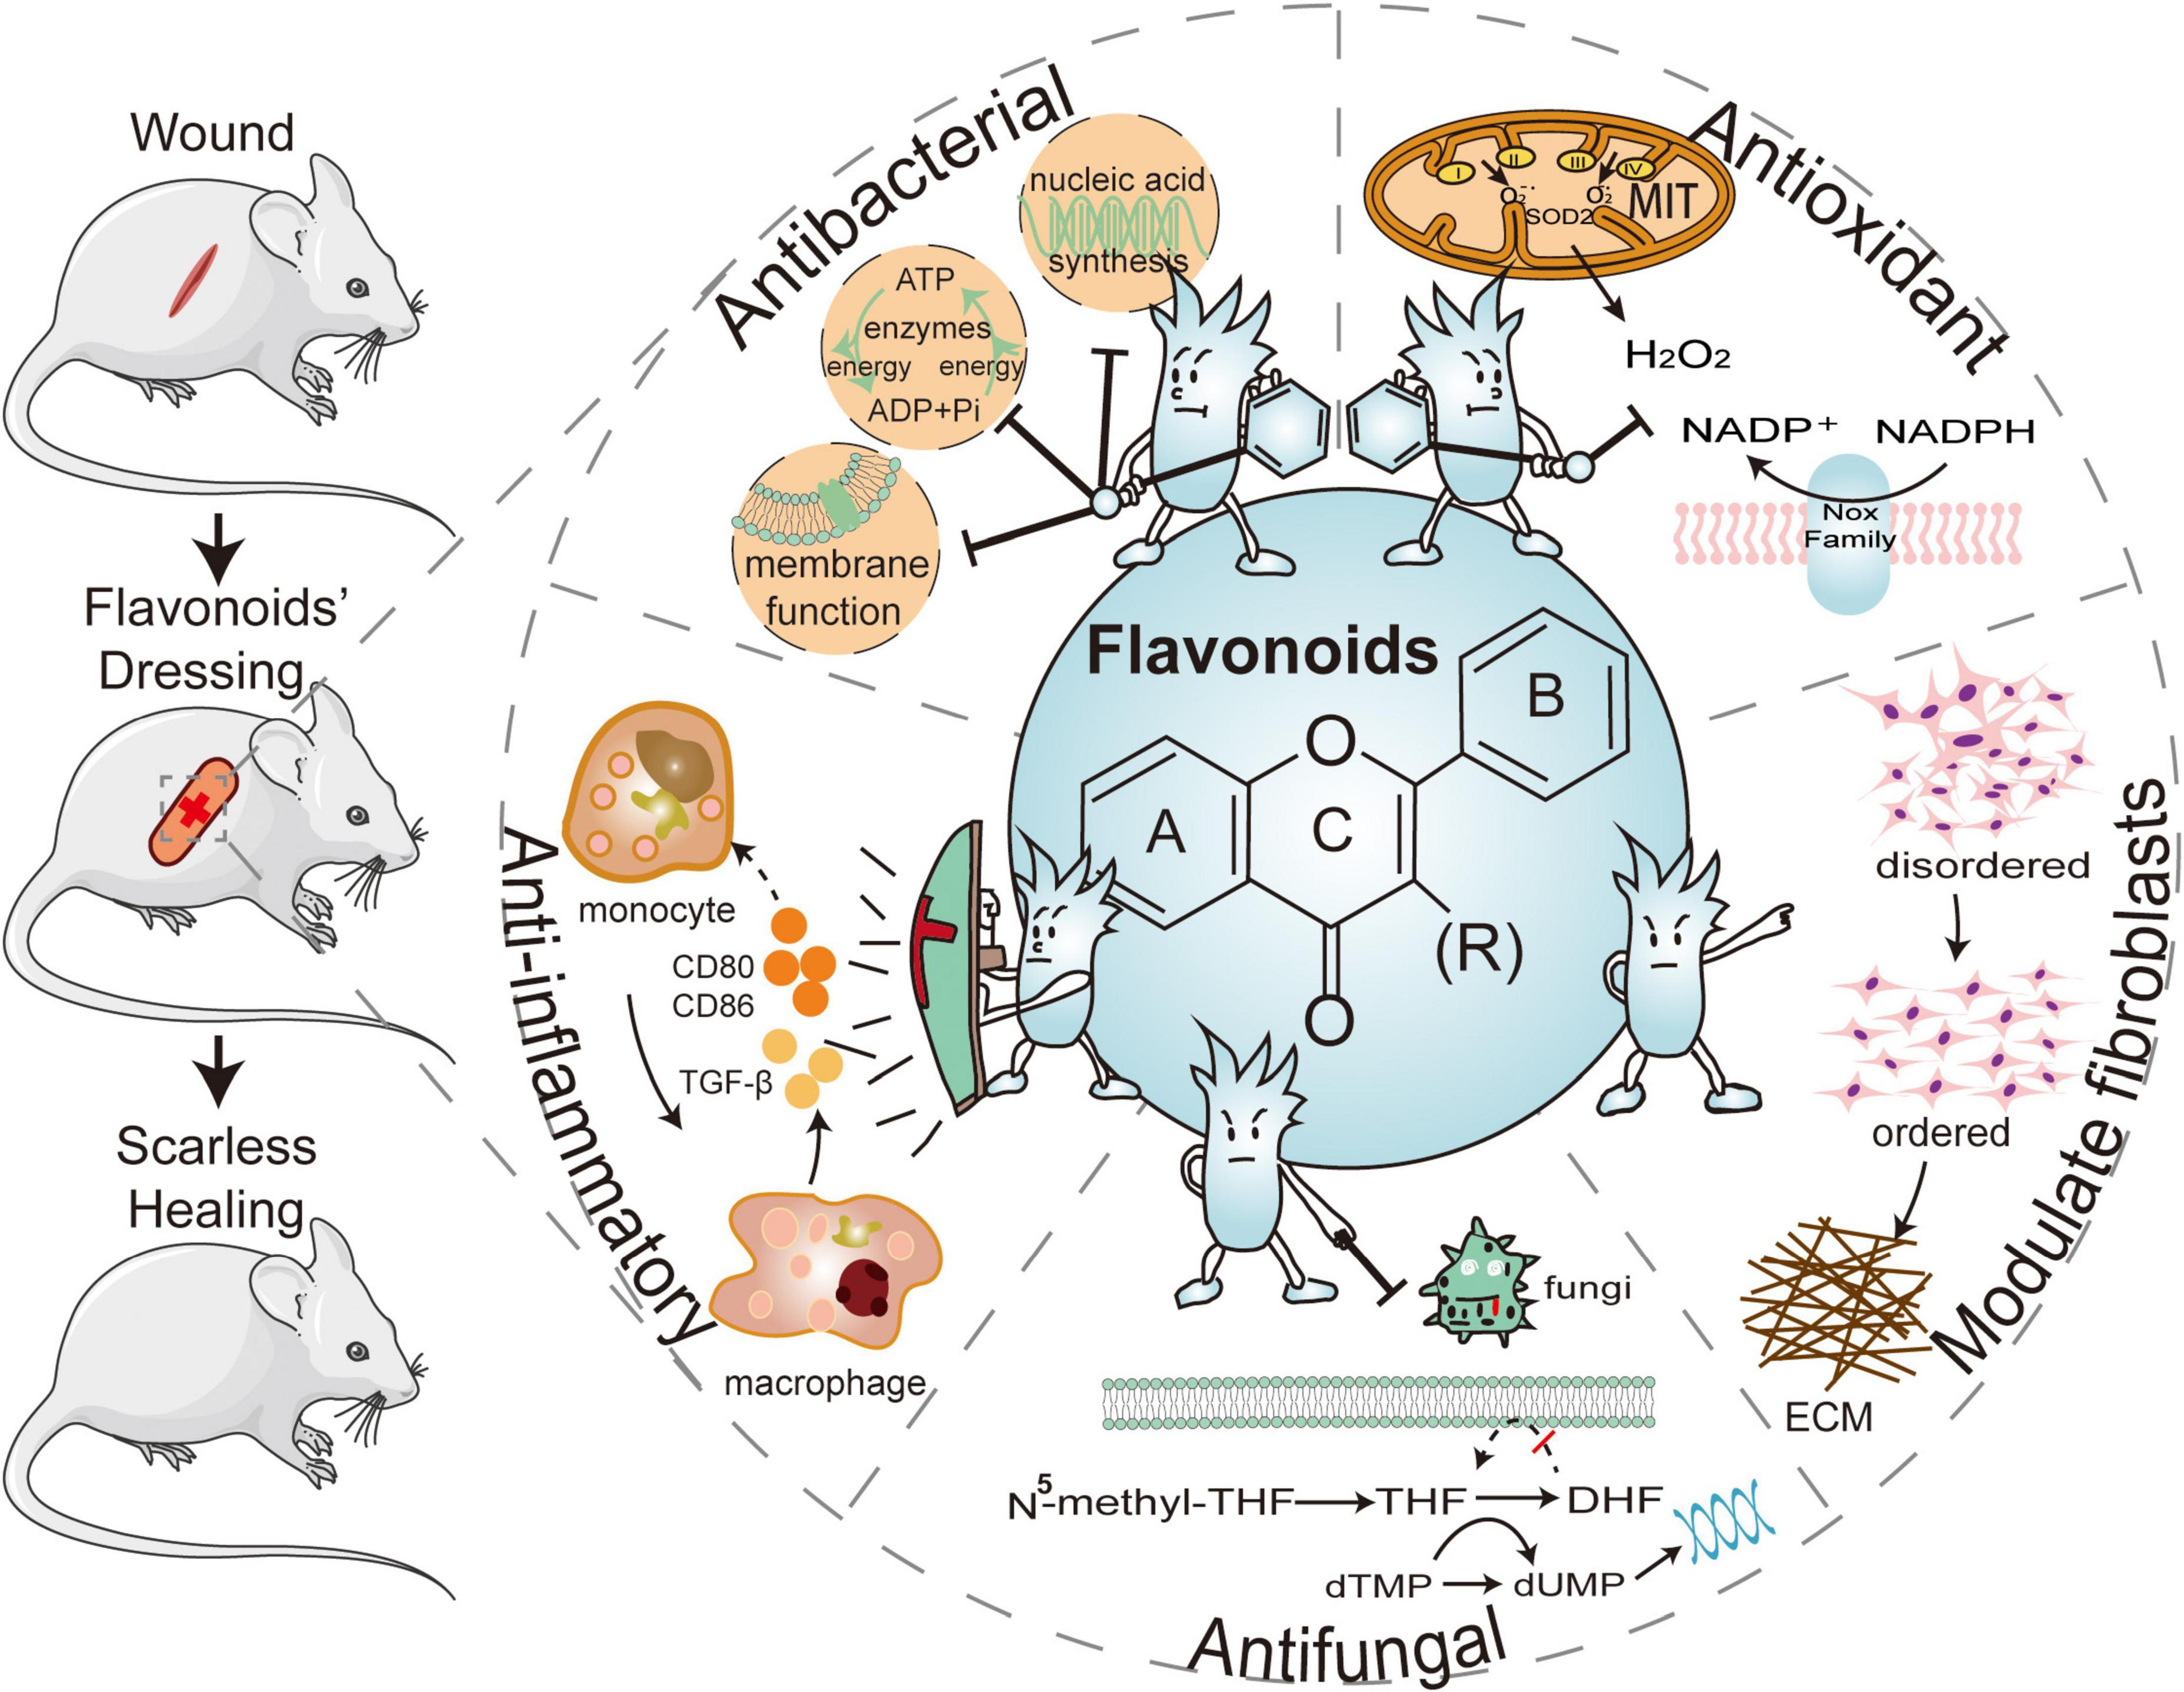 Flavonoids and wound healing